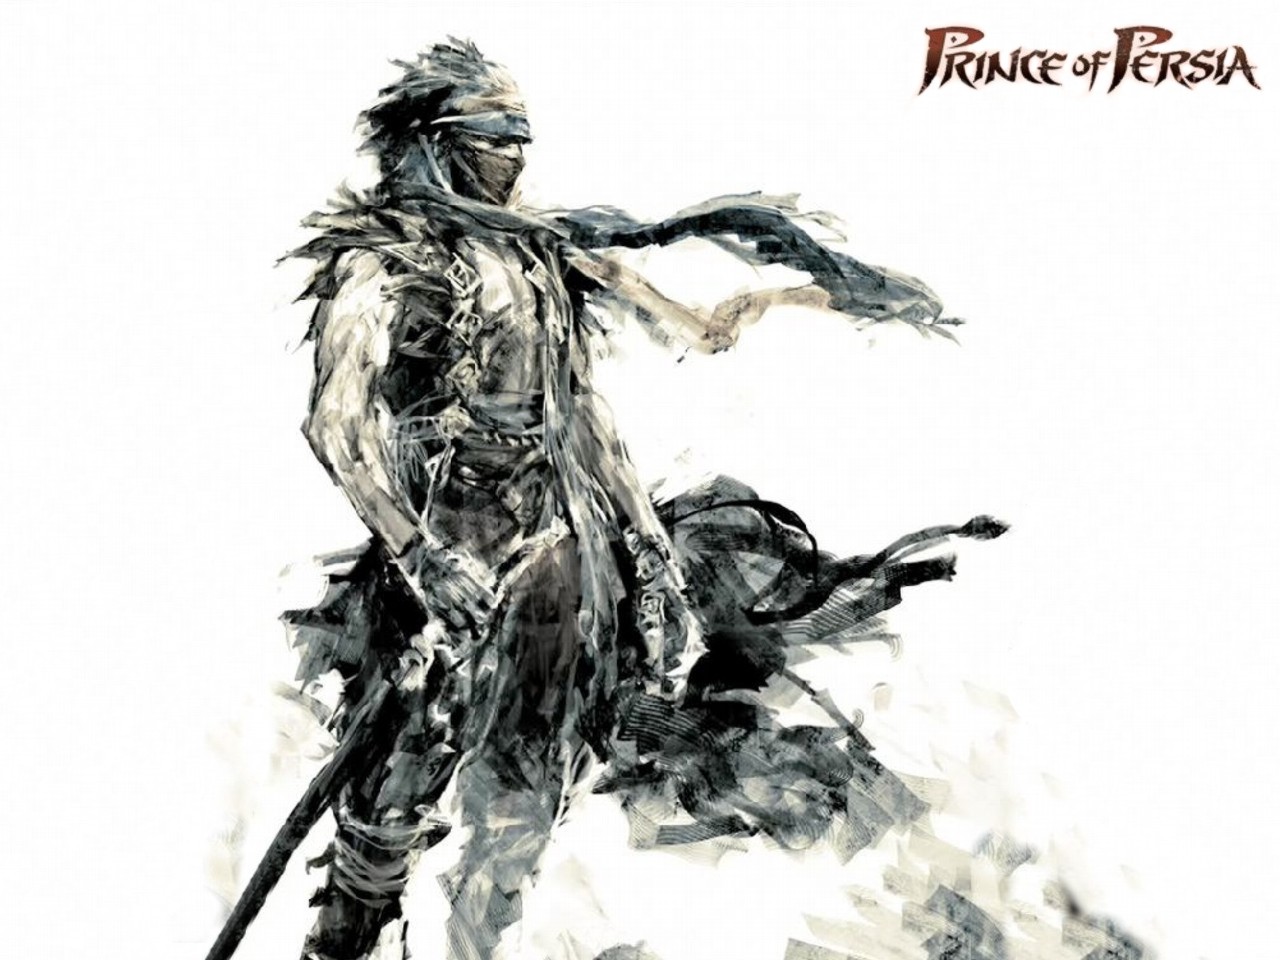 Download full size Prince of Persia wallpaper / Games / 1280x960